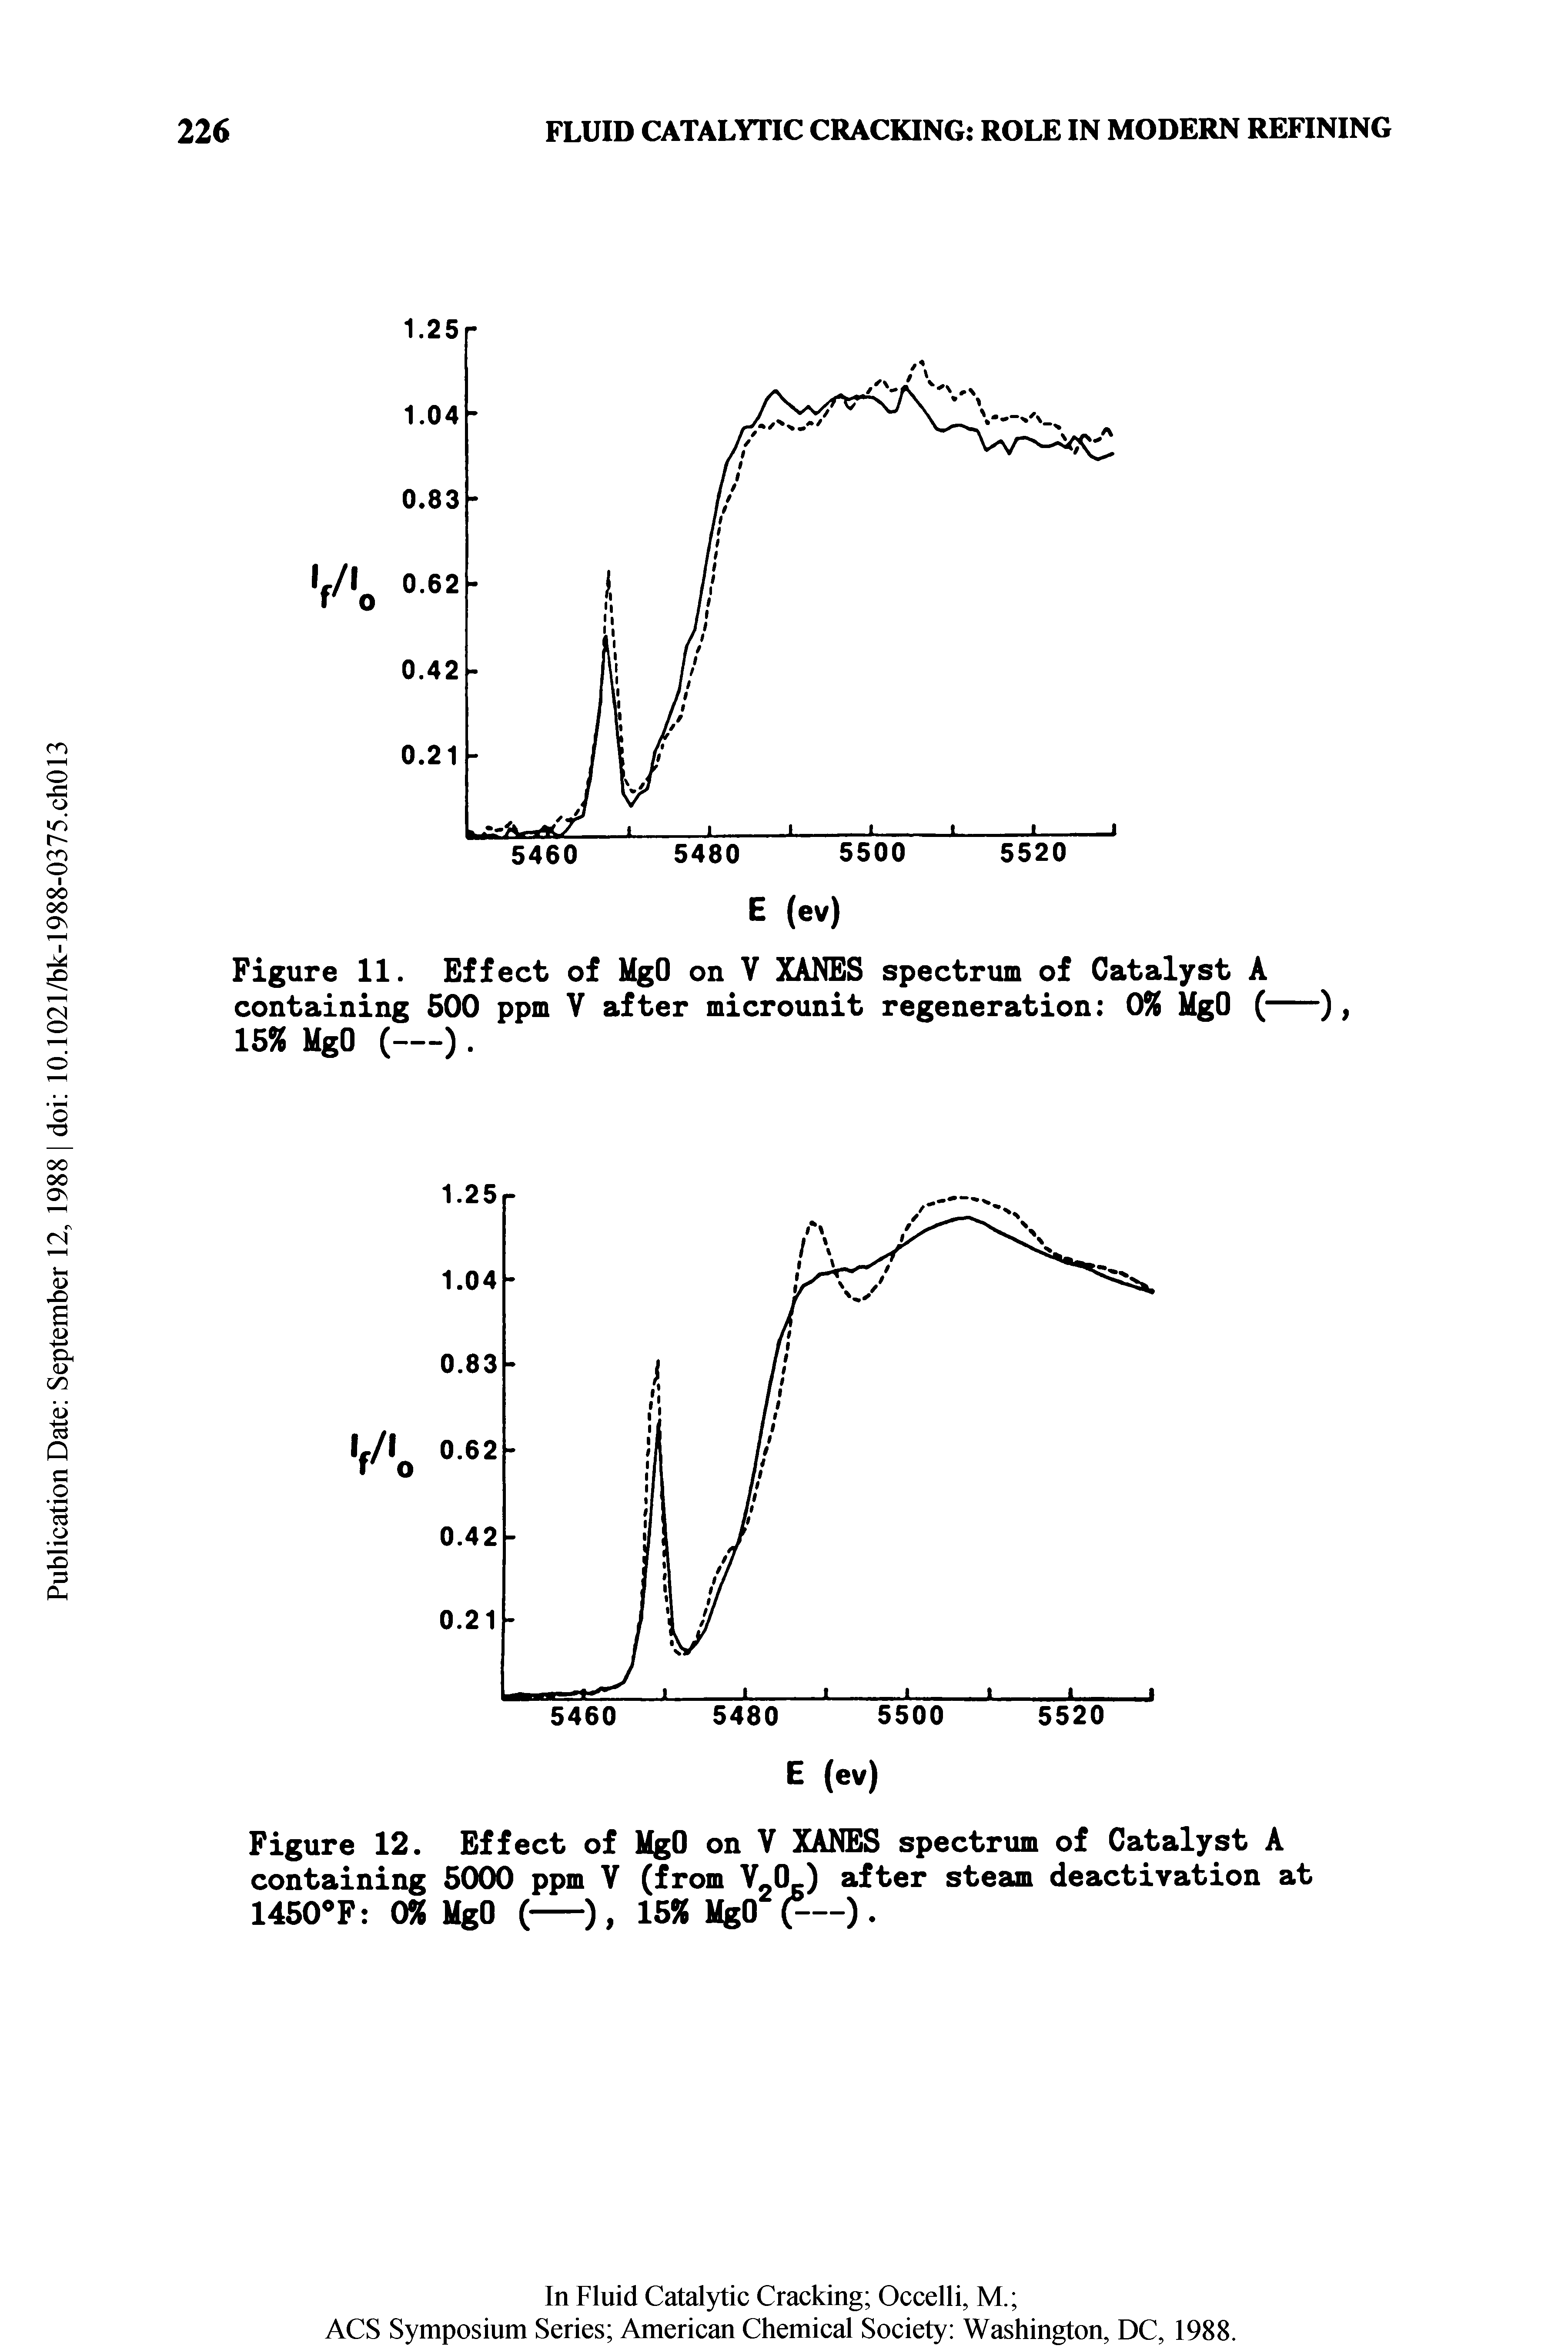 Figure 12. Effect of MgO on V XANES spectrum of Catalyst A containing 5000 ppm V (from V 0 ) after steam deactivation at 1450 F 0% MgO (----), 15% MgO. ...